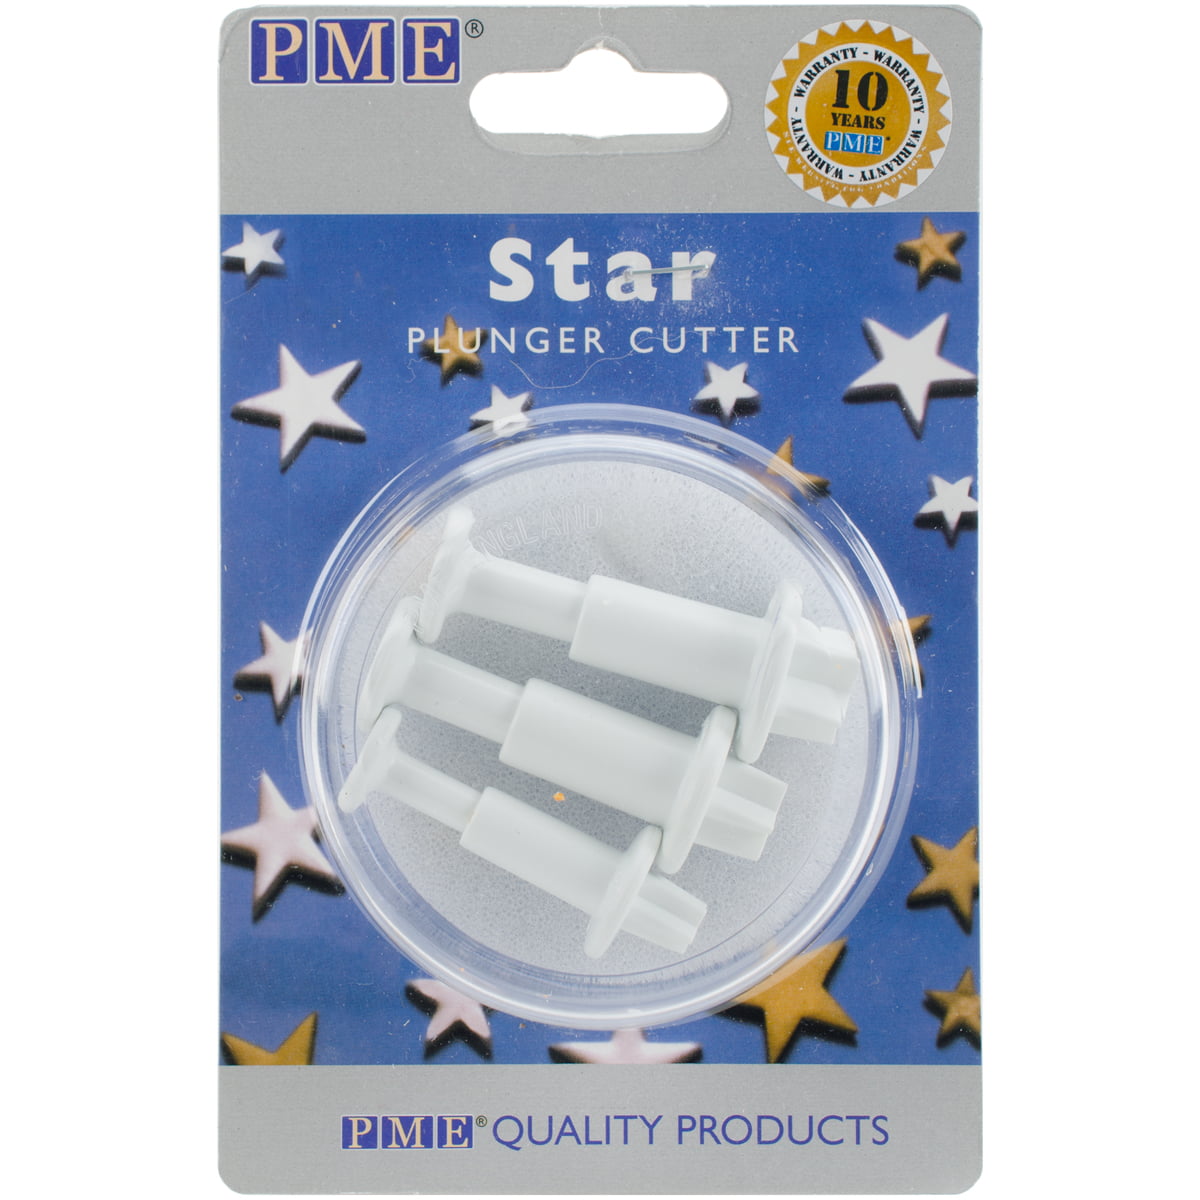 Double Sided Cutter XX Large Pme Round And Wavy Edge Double Sided Cutter Set